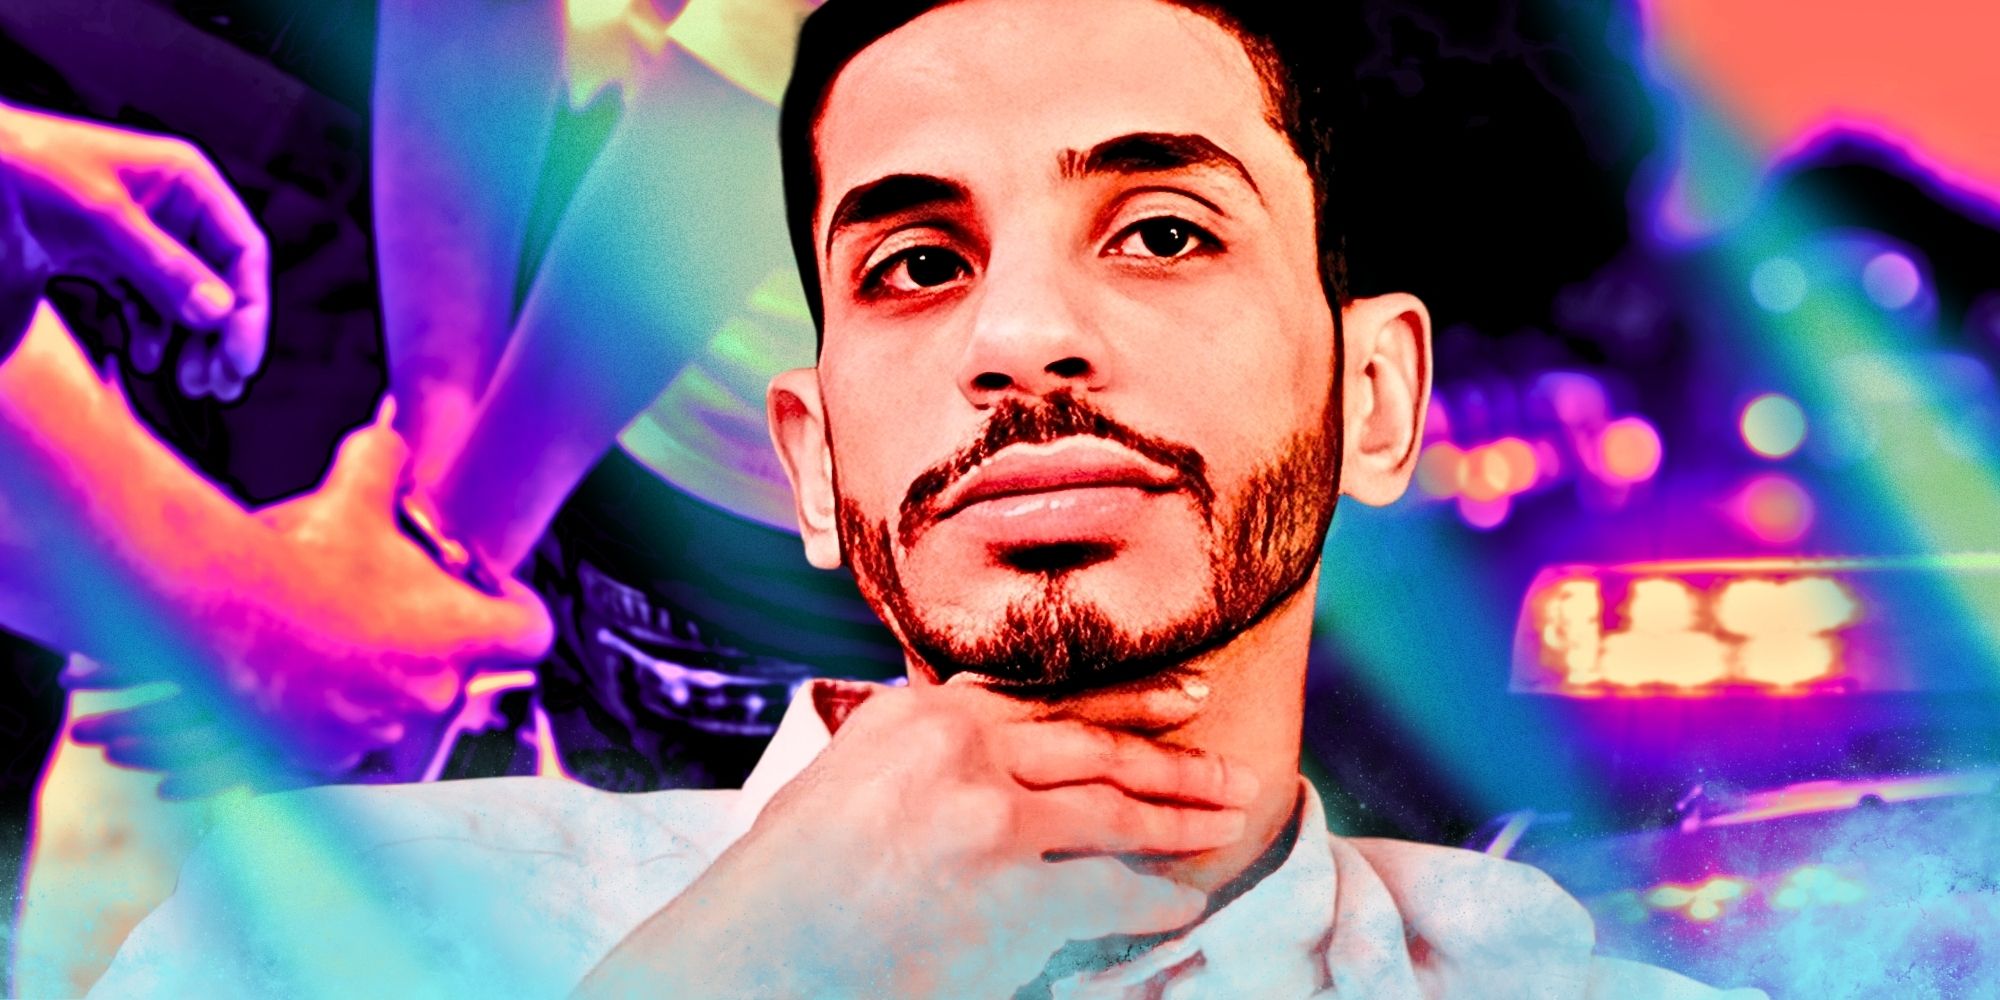 90 Day Fiancé Star Mahmoud El Sherbiny with police lights behind him